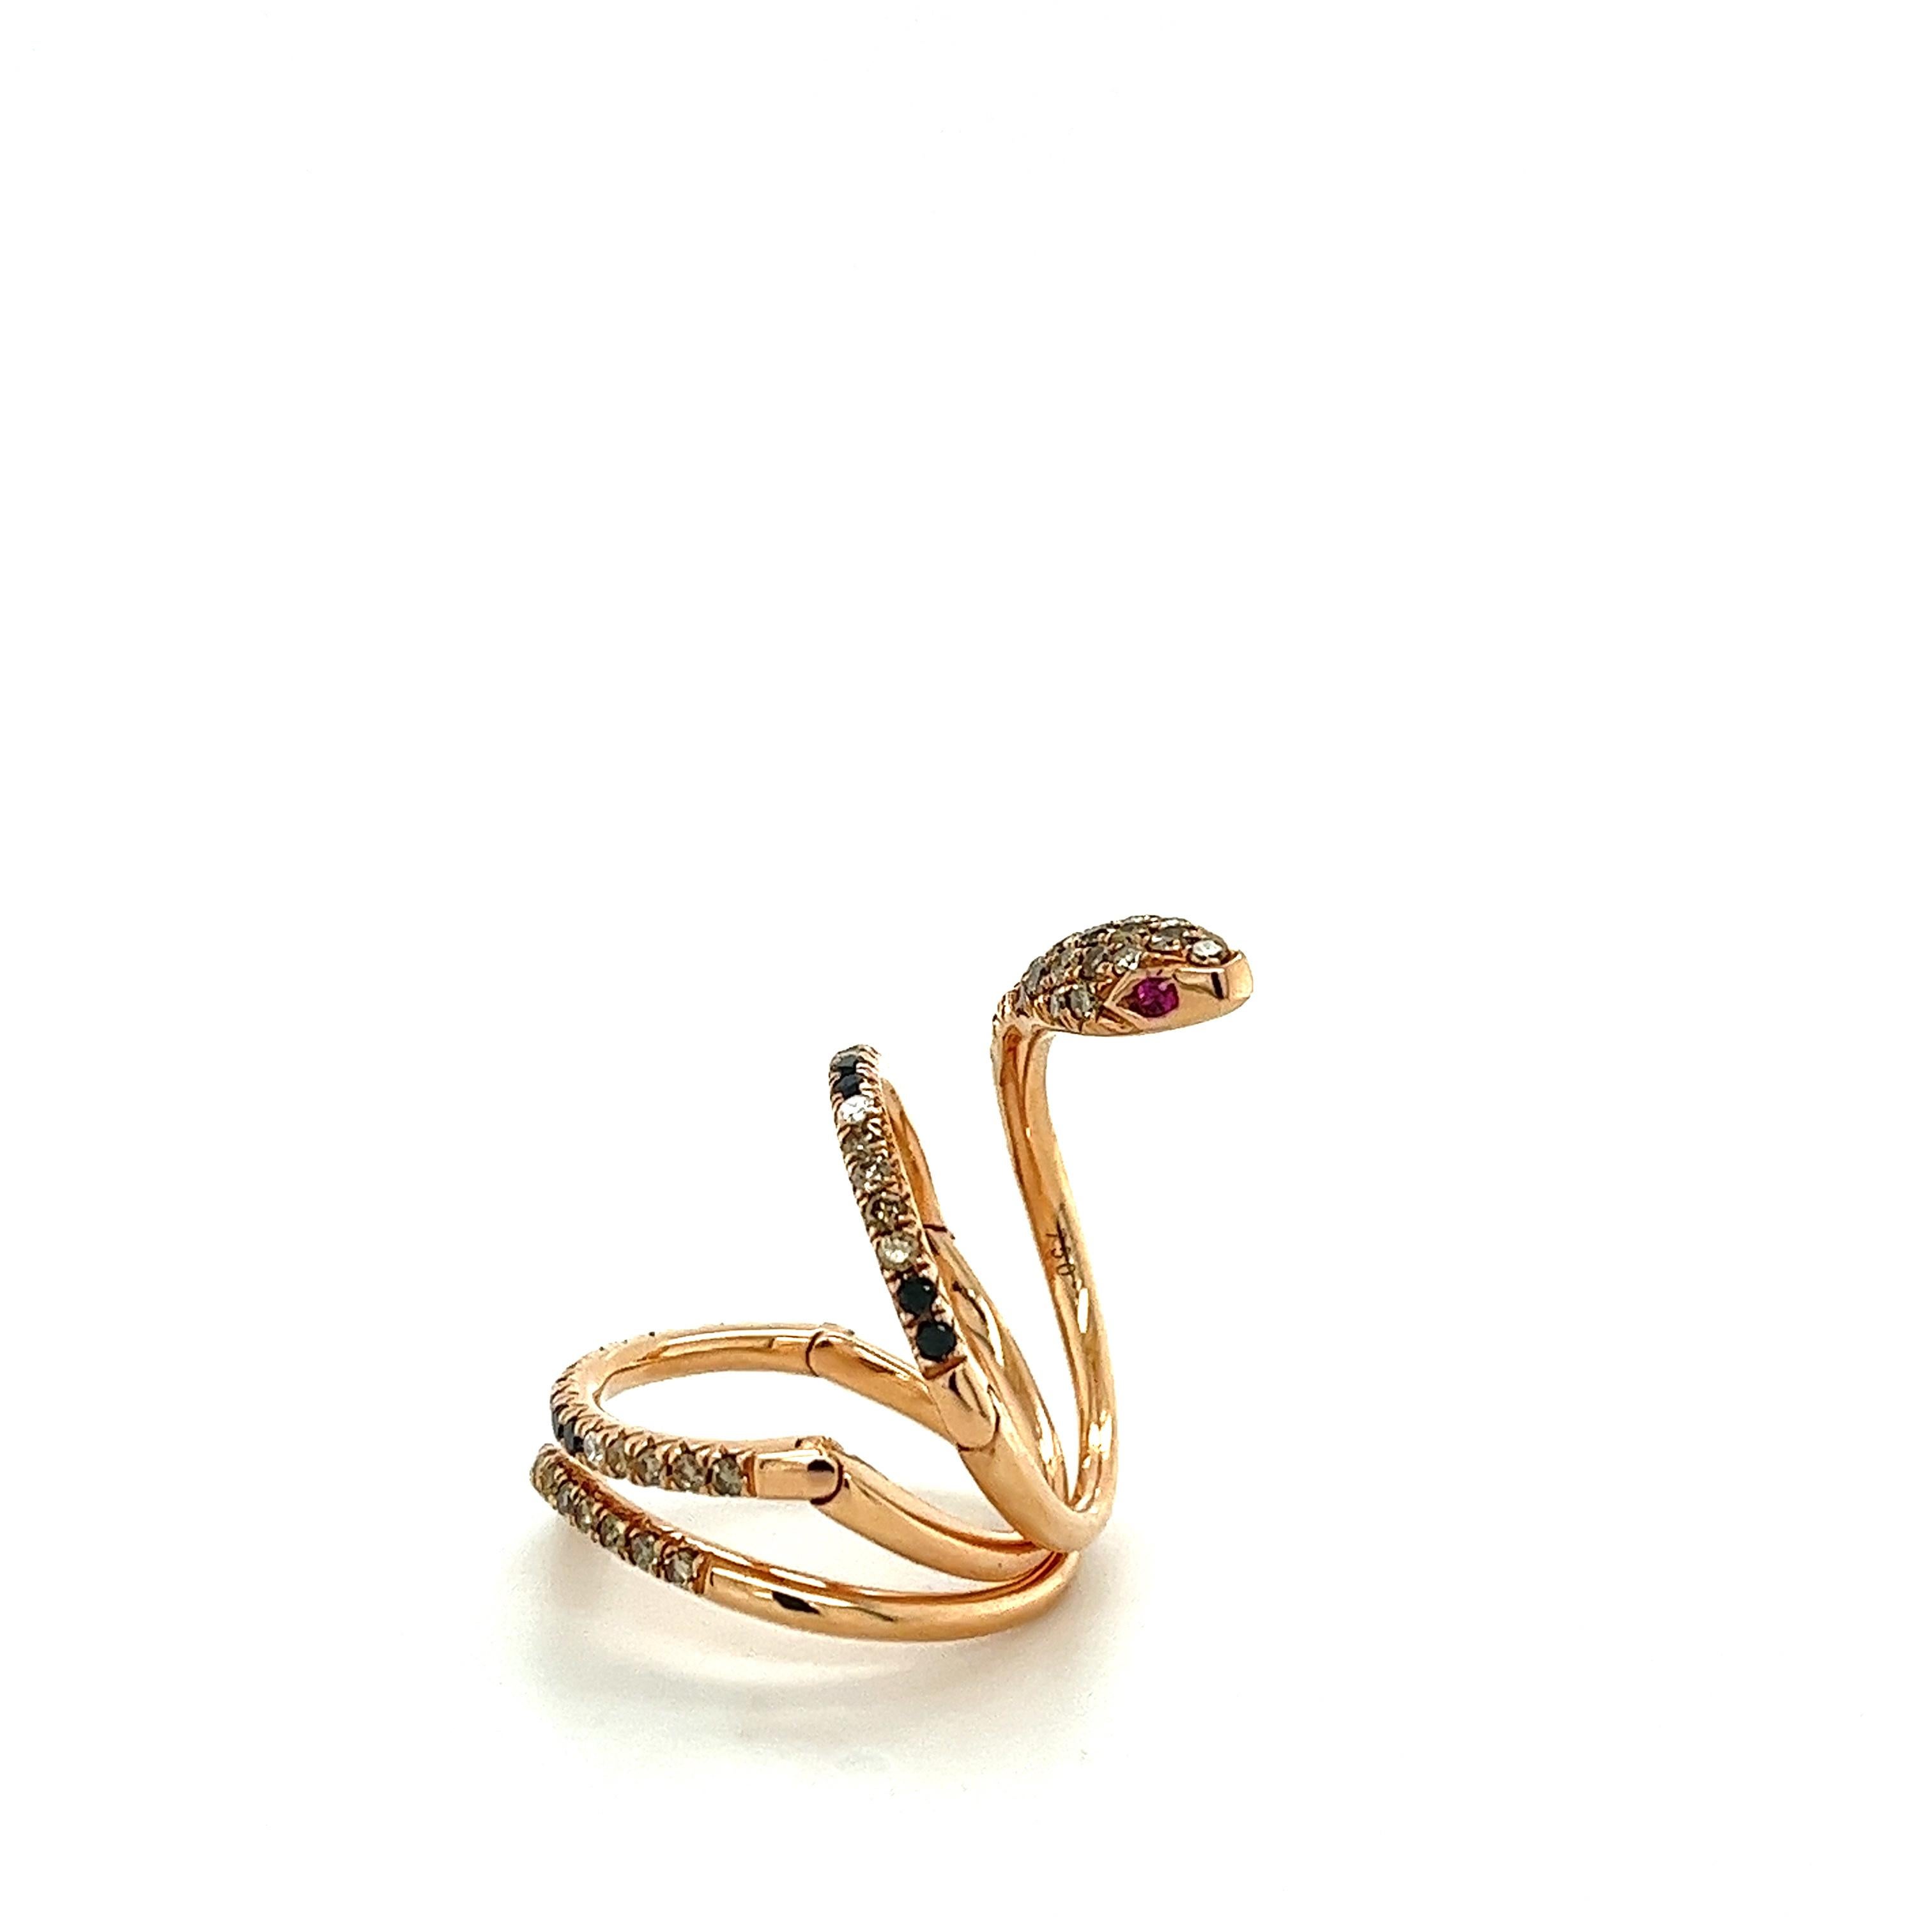 18 K Rose Gold Black Diamonds & Brown Diamonds Snake Ring 

50 Brown Diamonds 0.82 CT
16 Black Diamonds 0.25 CT
6 Diamonds 0.07 CT
2 Rubies 0.04 CT
18 K Rose Gold 8.76 GM

The diamond means clarity, truth, and vision. Handicrafters made this noble